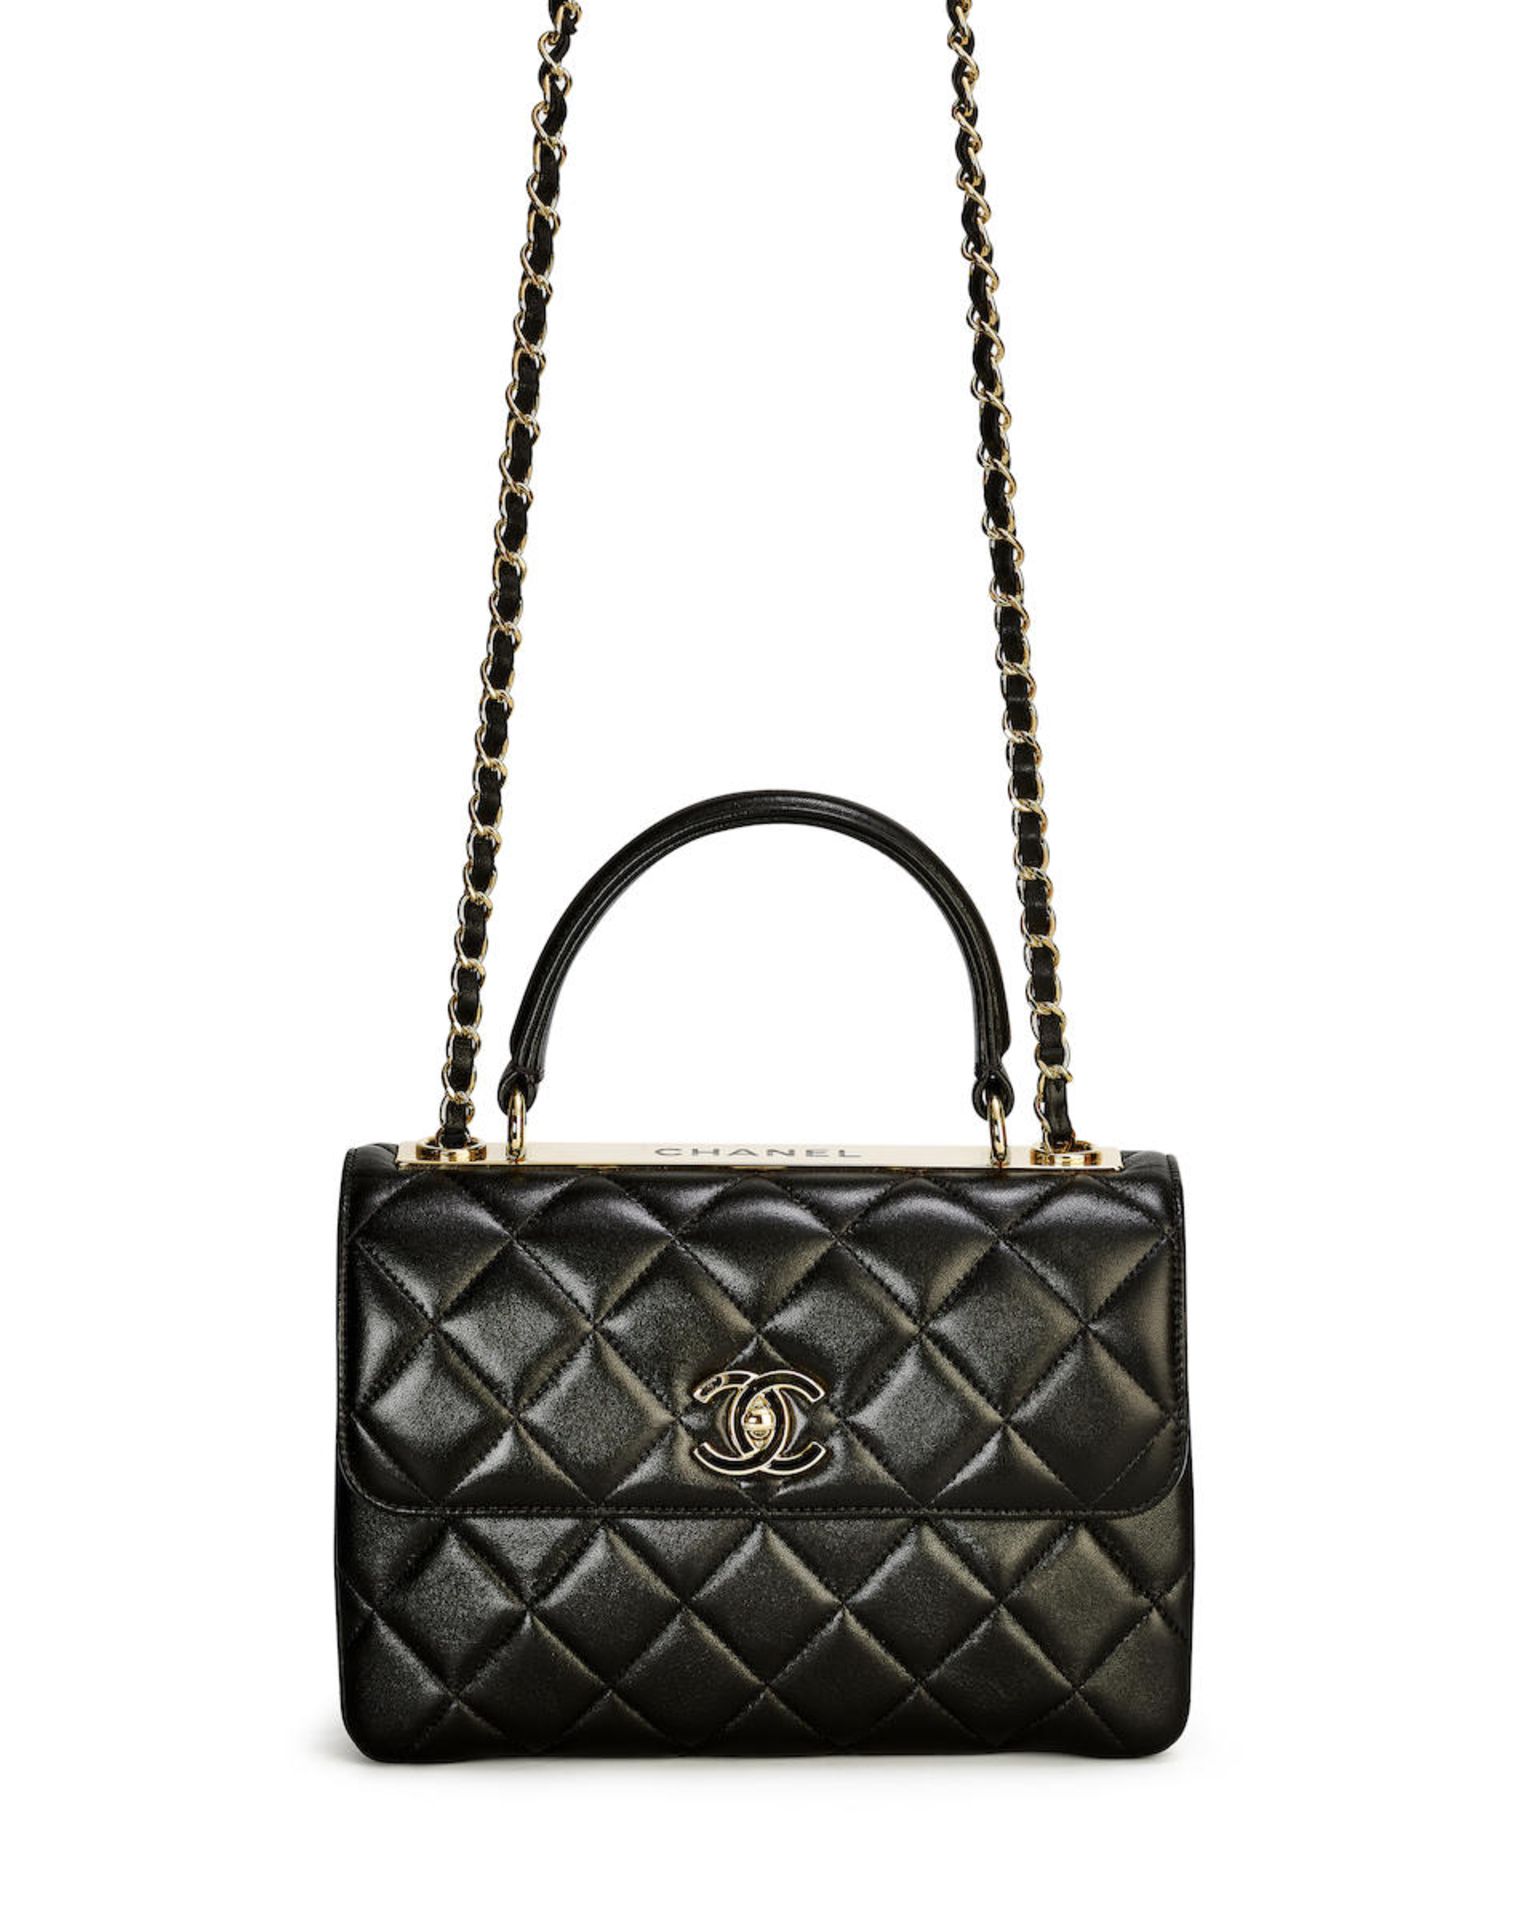 CHANEL: BLACK LAMBSKIN SMALL TRENDY CC HANDLE WITH GOLD TONED HARDWARE (Includes serial sticker,...